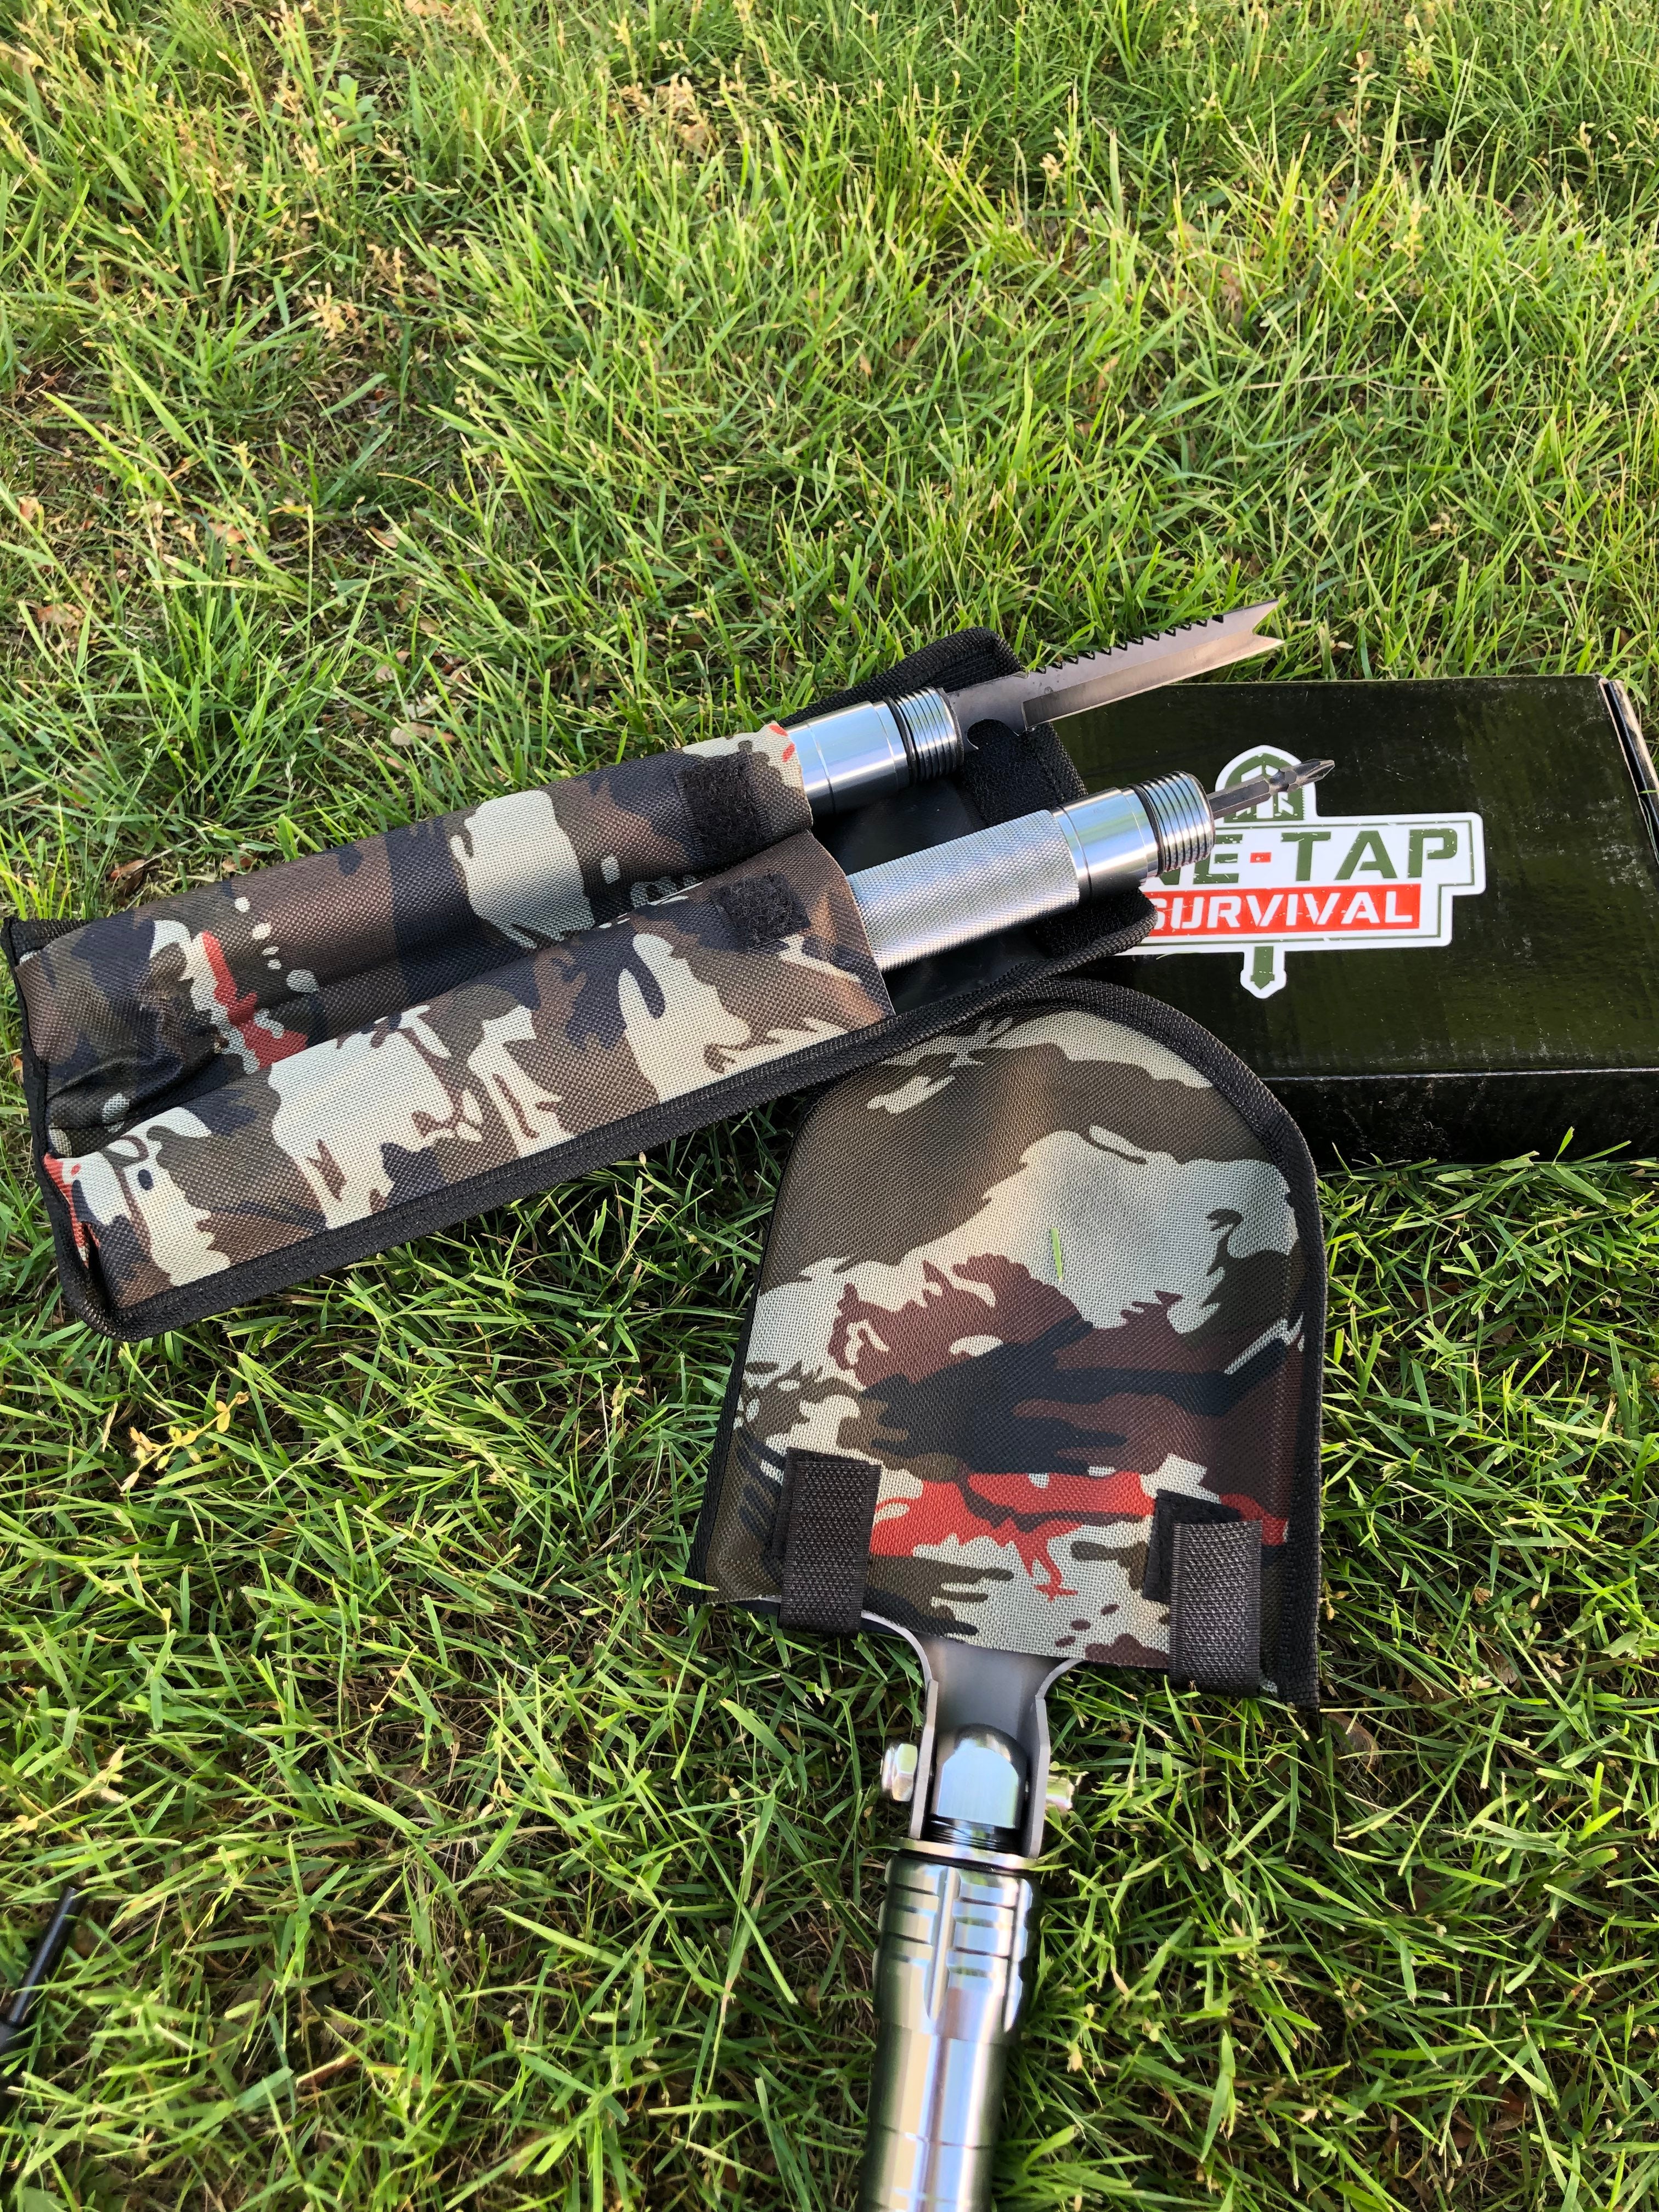 Sharpal Survival Tools Review - Tailgating Challenge